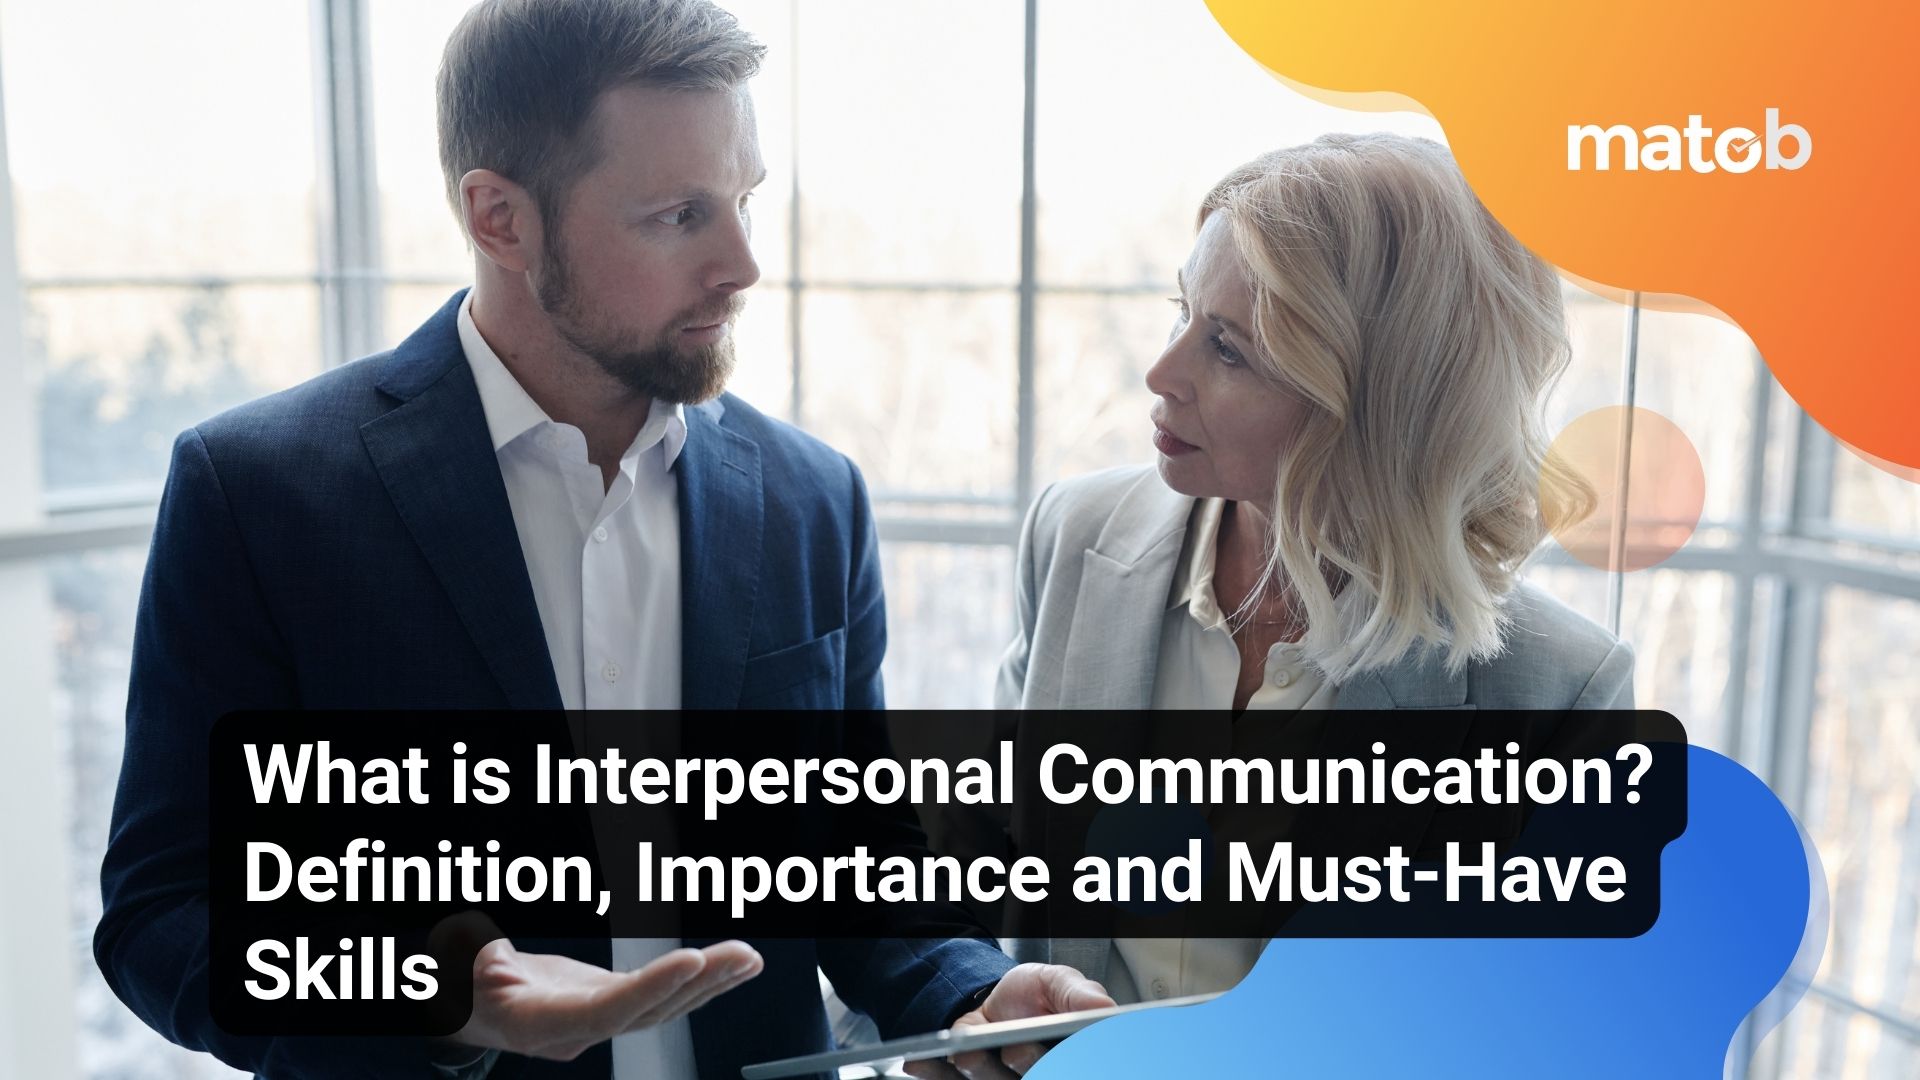 What is Interpersonal Communication? Definition, Importance and Must-Have Skills